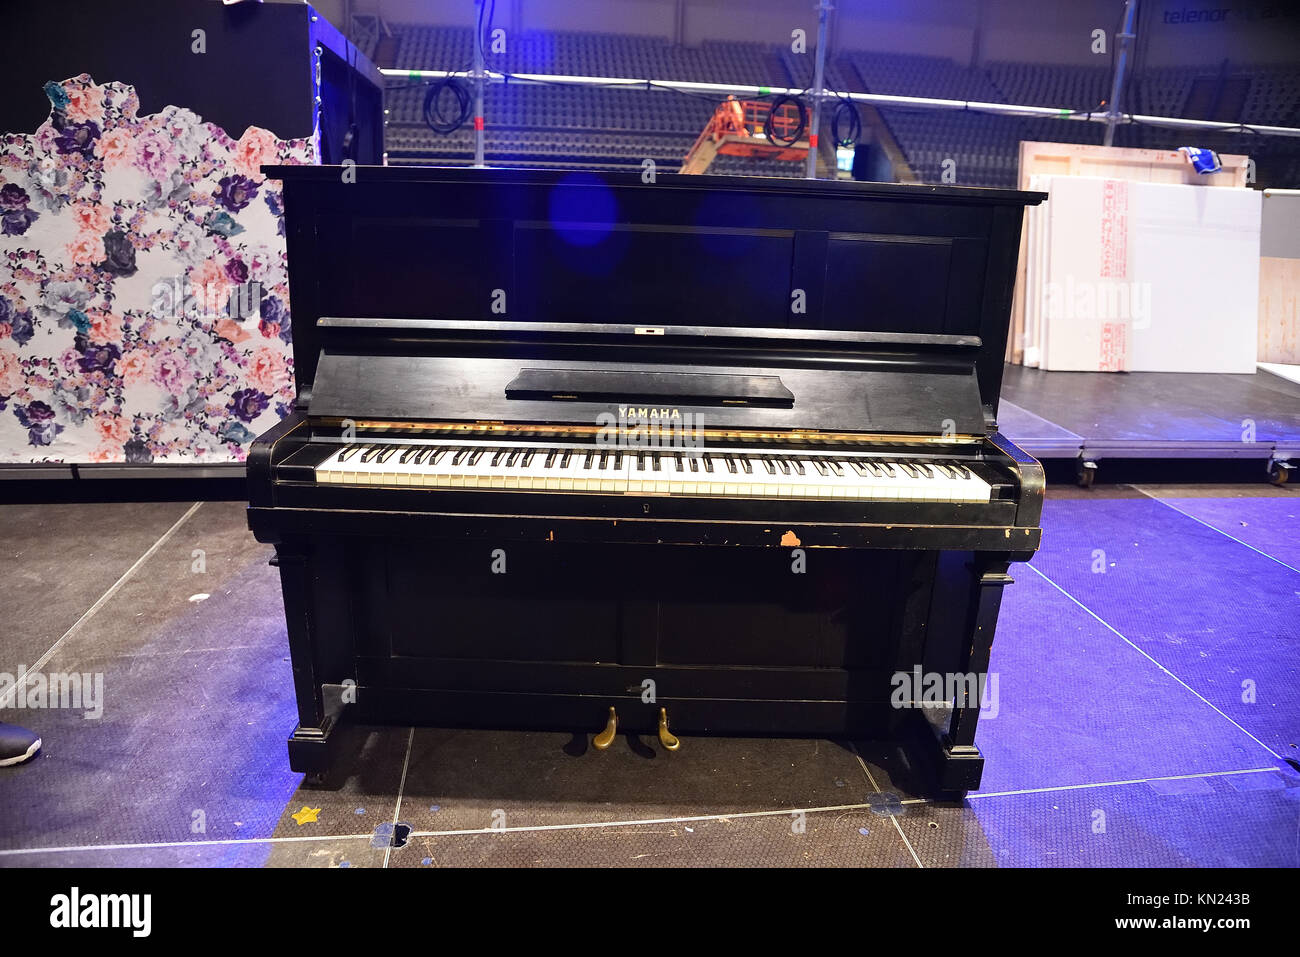 Oslo, Norway. 09th Dec, 2017. A piano which has survived the Hiroshima nuclear explosion has been unpacked in Norway, and it will be played at the Nobel Peace Prize Concert this year. It is one of the six pianos which survived the atomic bombings of Hiroshima and Nagasaki in August 1945. 9th Dec, 2017. The 2017 Nobel Peace Prize has been awarded to the International Campaign to Abolish Nuclear Weapons (ICAN), and this piano is a reminder of the catastrophic humanitarian consequences of the use of nuclear weapons Credit: C) ImagesLive/ZUMA Wire/Alamy Live News Credit: ZUMA Press, Inc./Alamy Liv Stock Photo